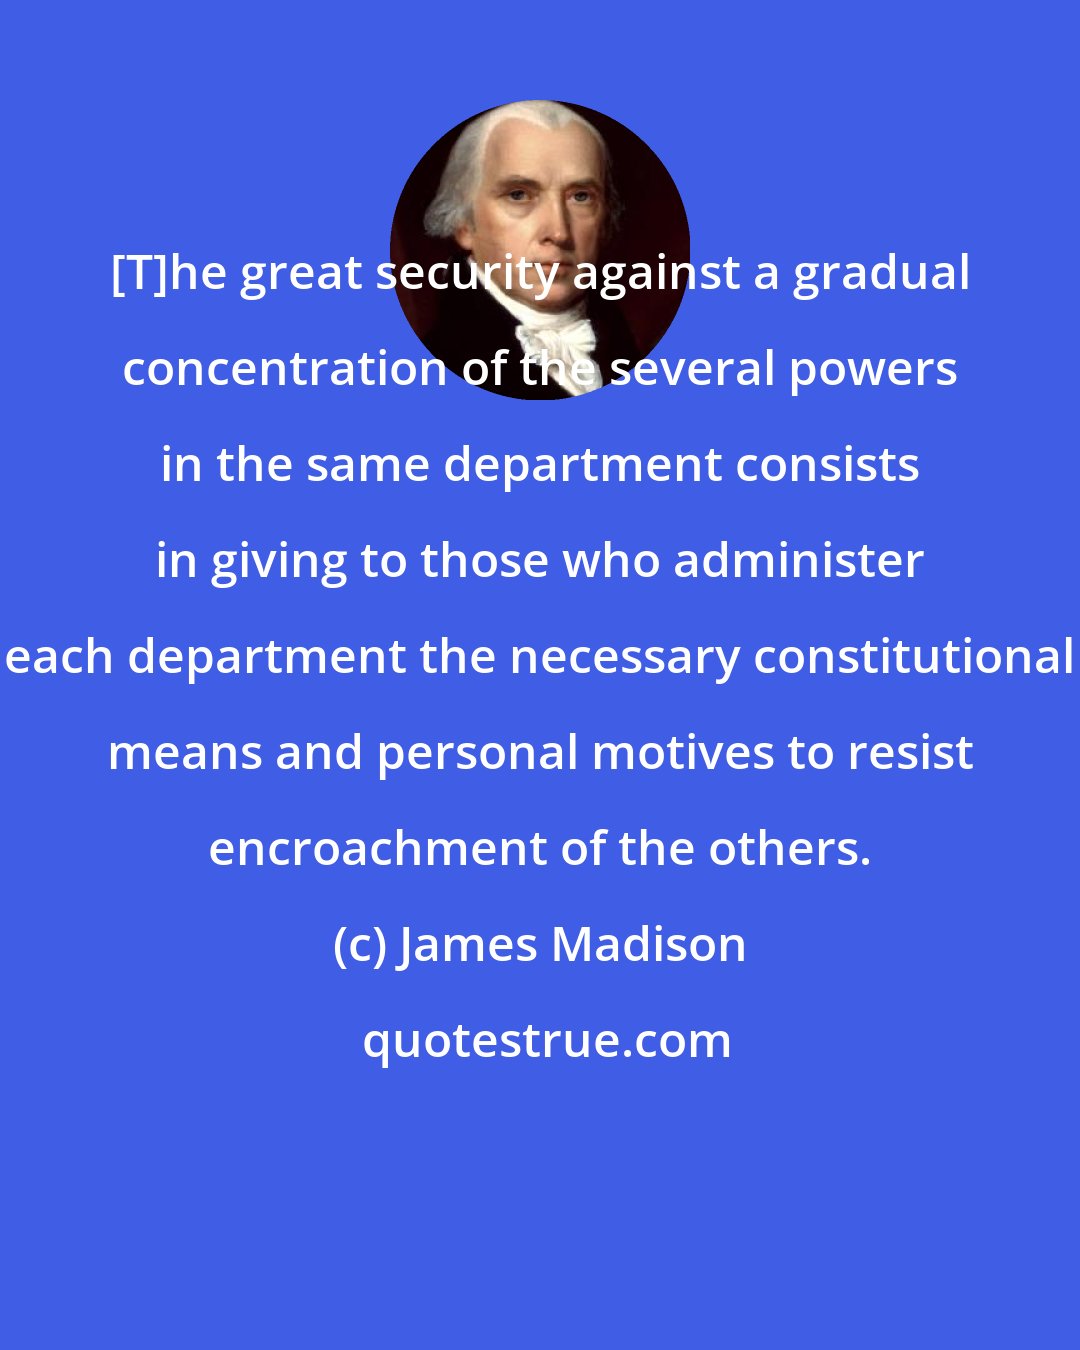 James Madison: [T]he great security against a gradual concentration of the several powers in the same department consists in giving to those who administer each department the necessary constitutional means and personal motives to resist encroachment of the others.